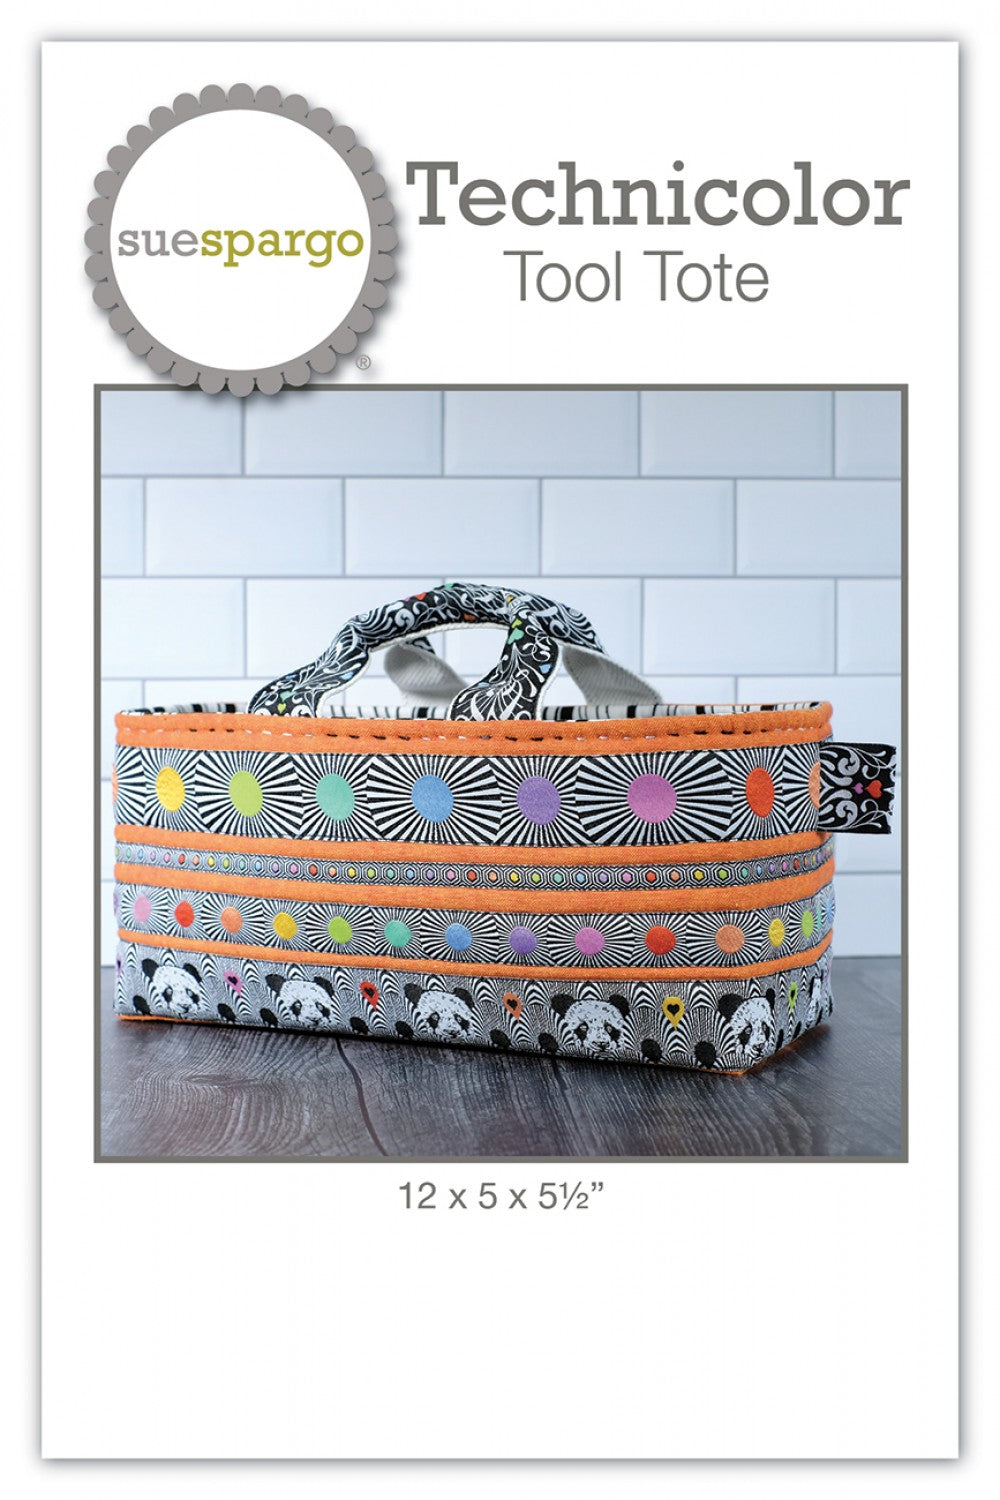 Technicolor Tool Tote - Applique, Embroidery, and Sewing Pattern by Sue Spargo of Folk Art Quilts